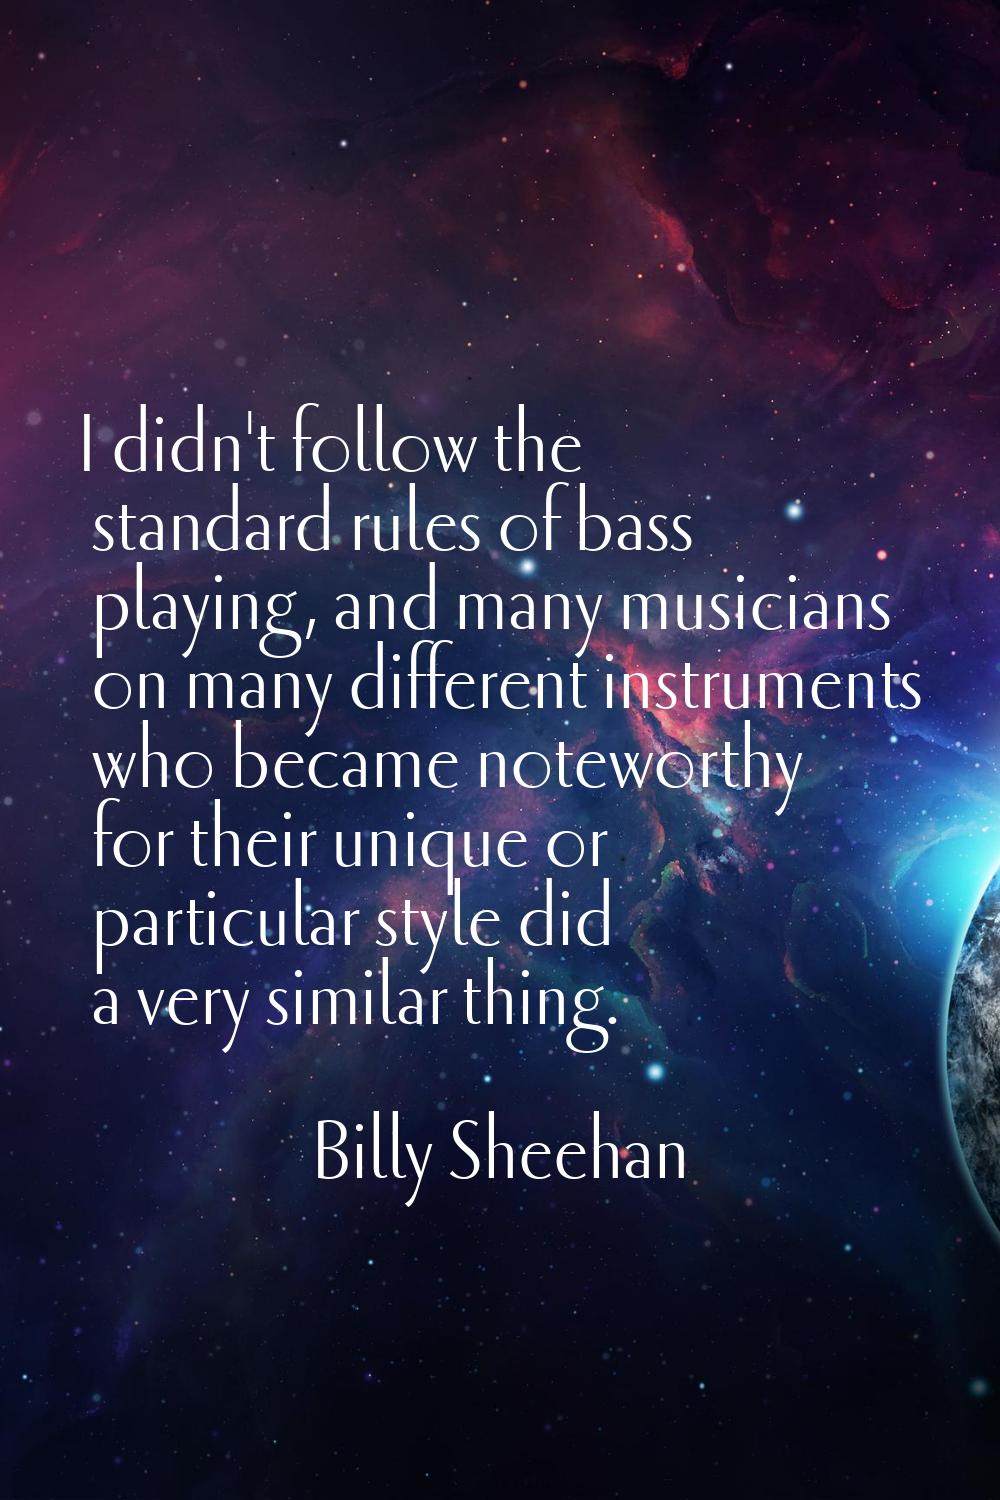 I didn't follow the standard rules of bass playing, and many musicians on many different instrument